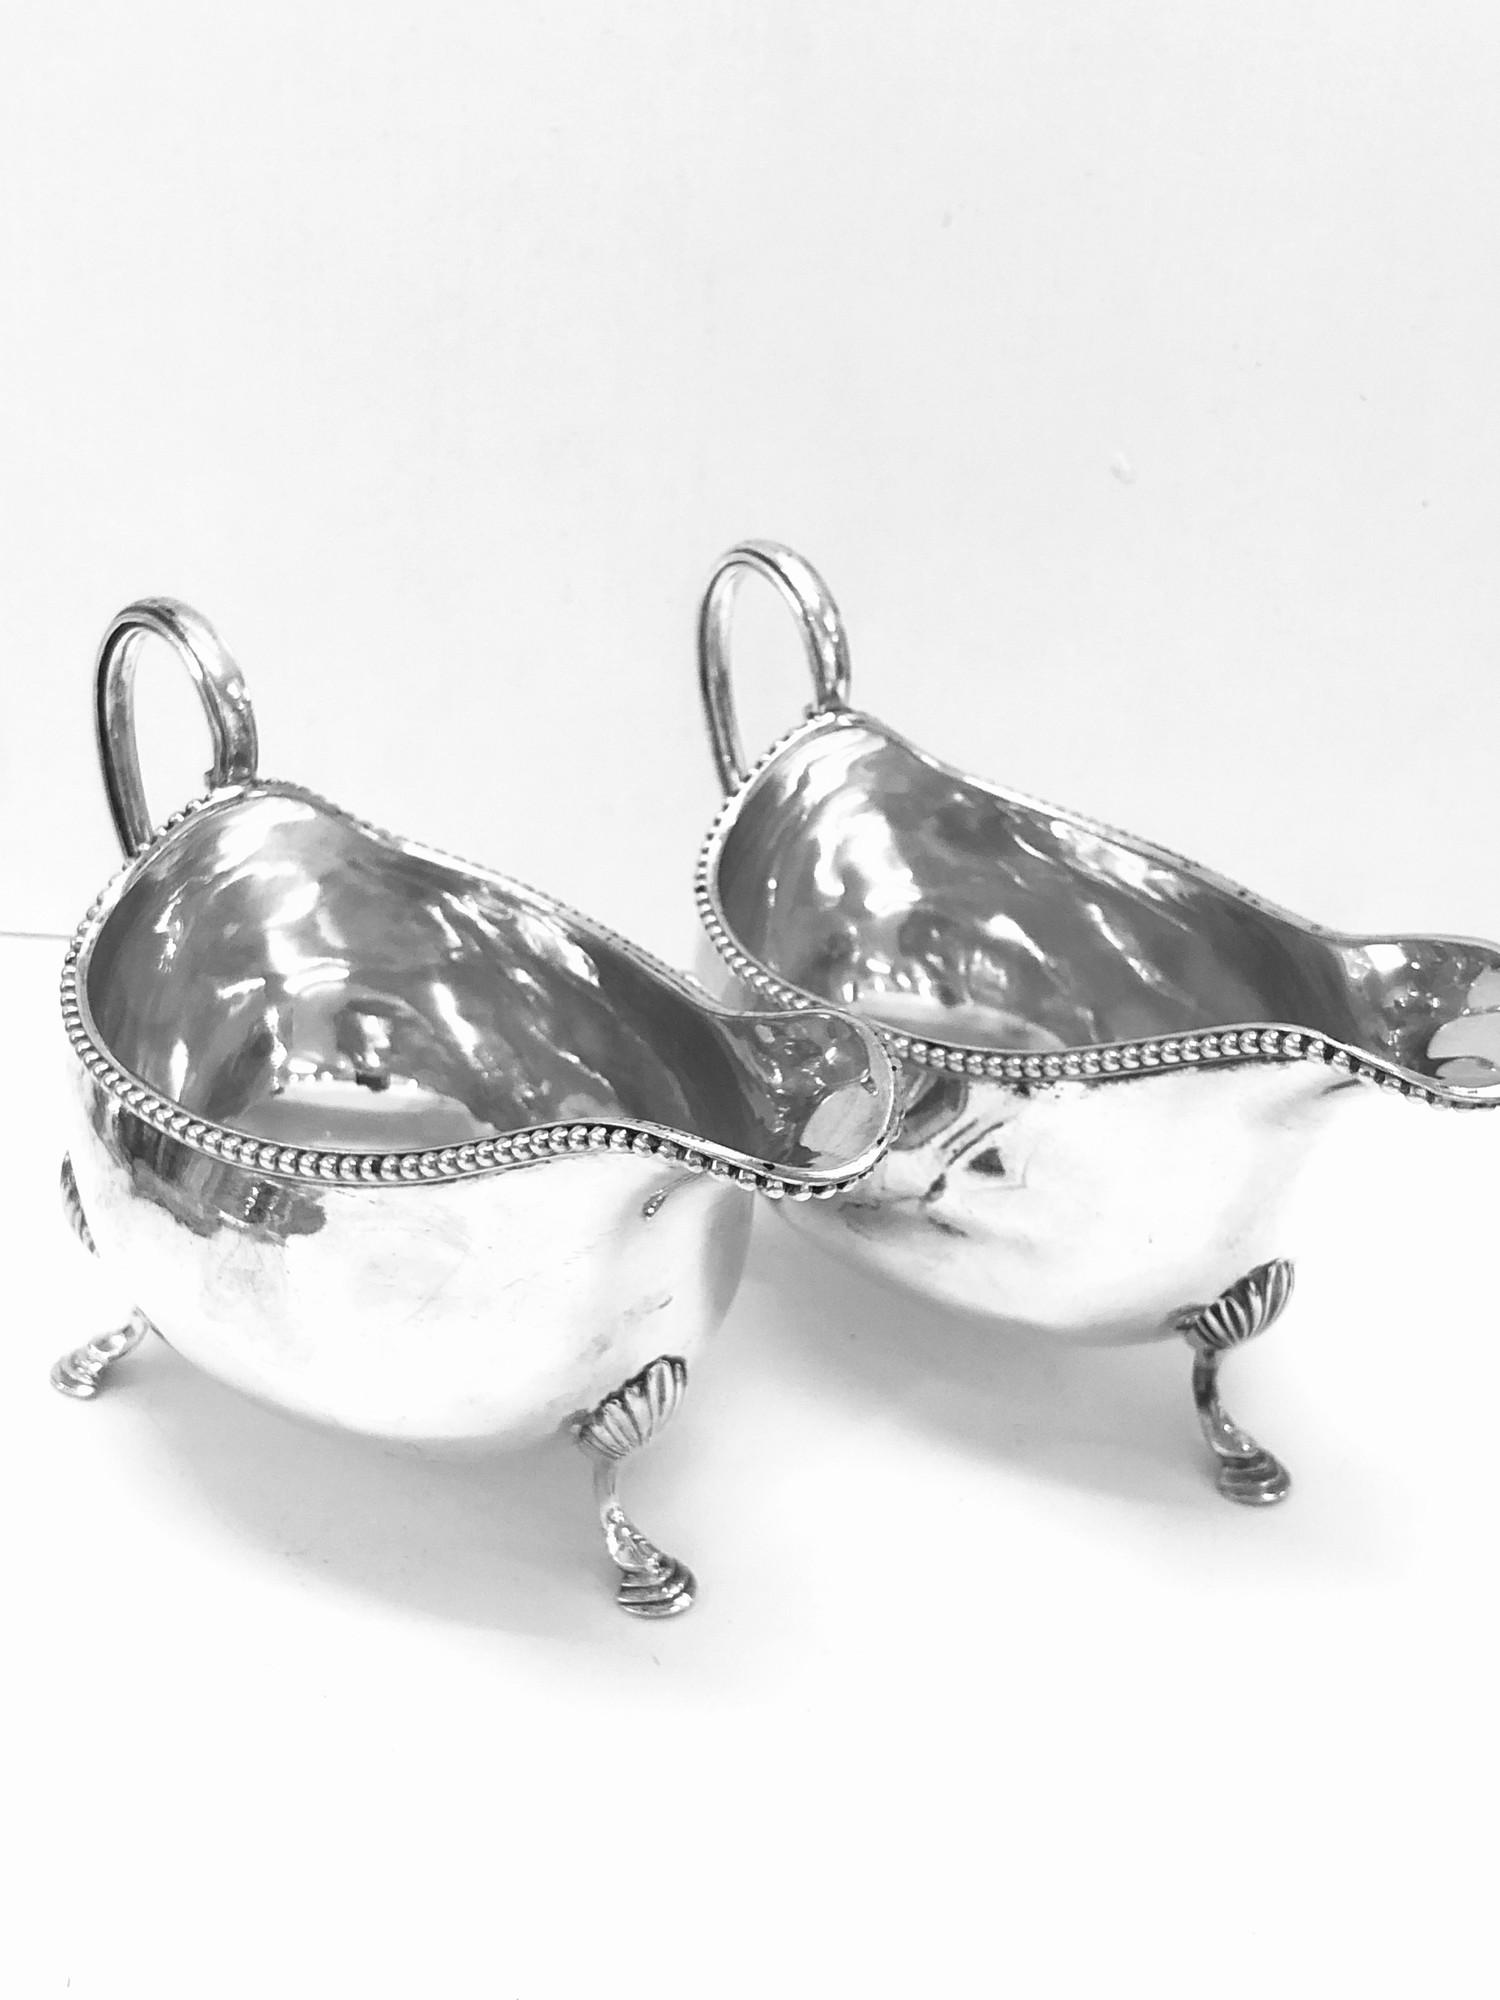 Pair of antique Georgian silver sauce boats london silver hallmarks date letter d weight 405g - Image 3 of 4